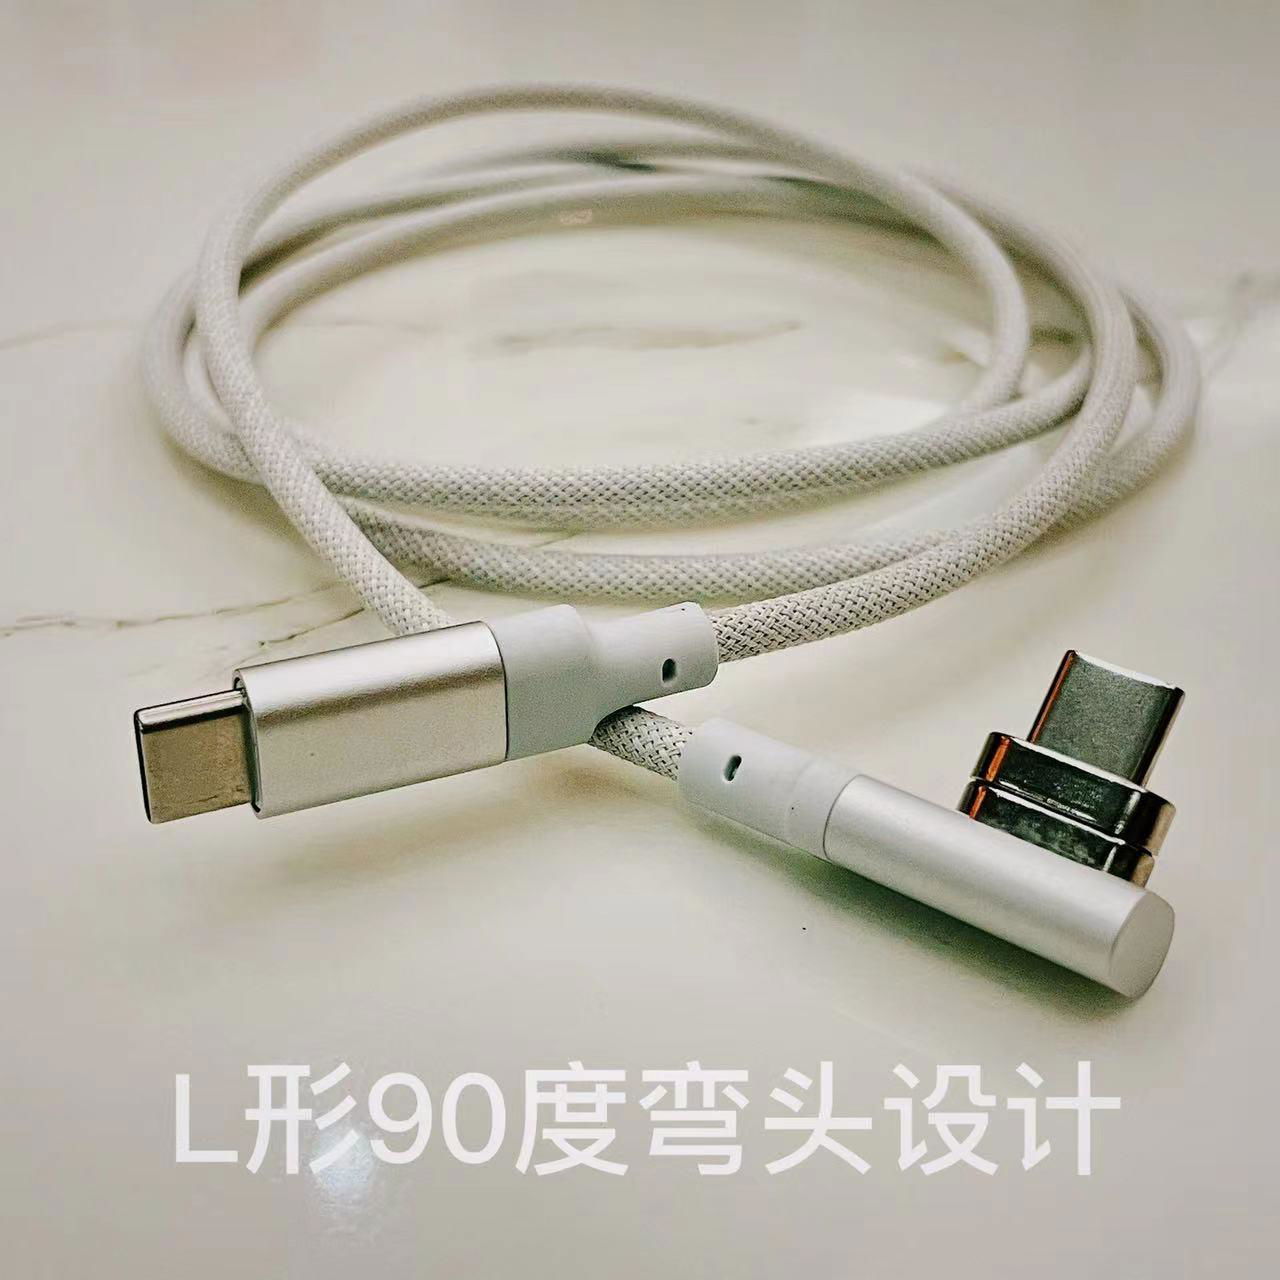 PD quick charger USB2.0 cable 2